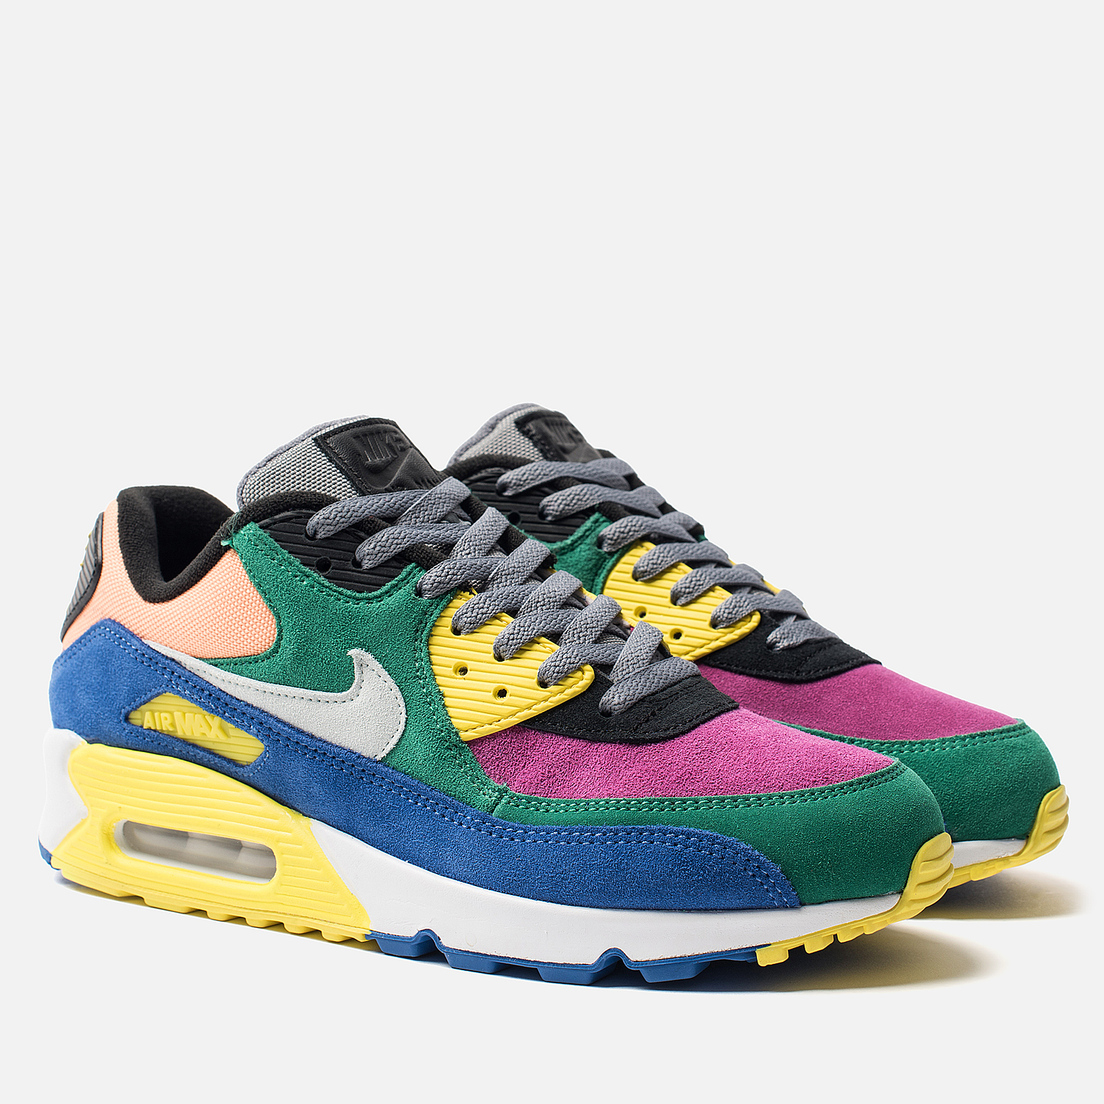 air max 90 edition limited